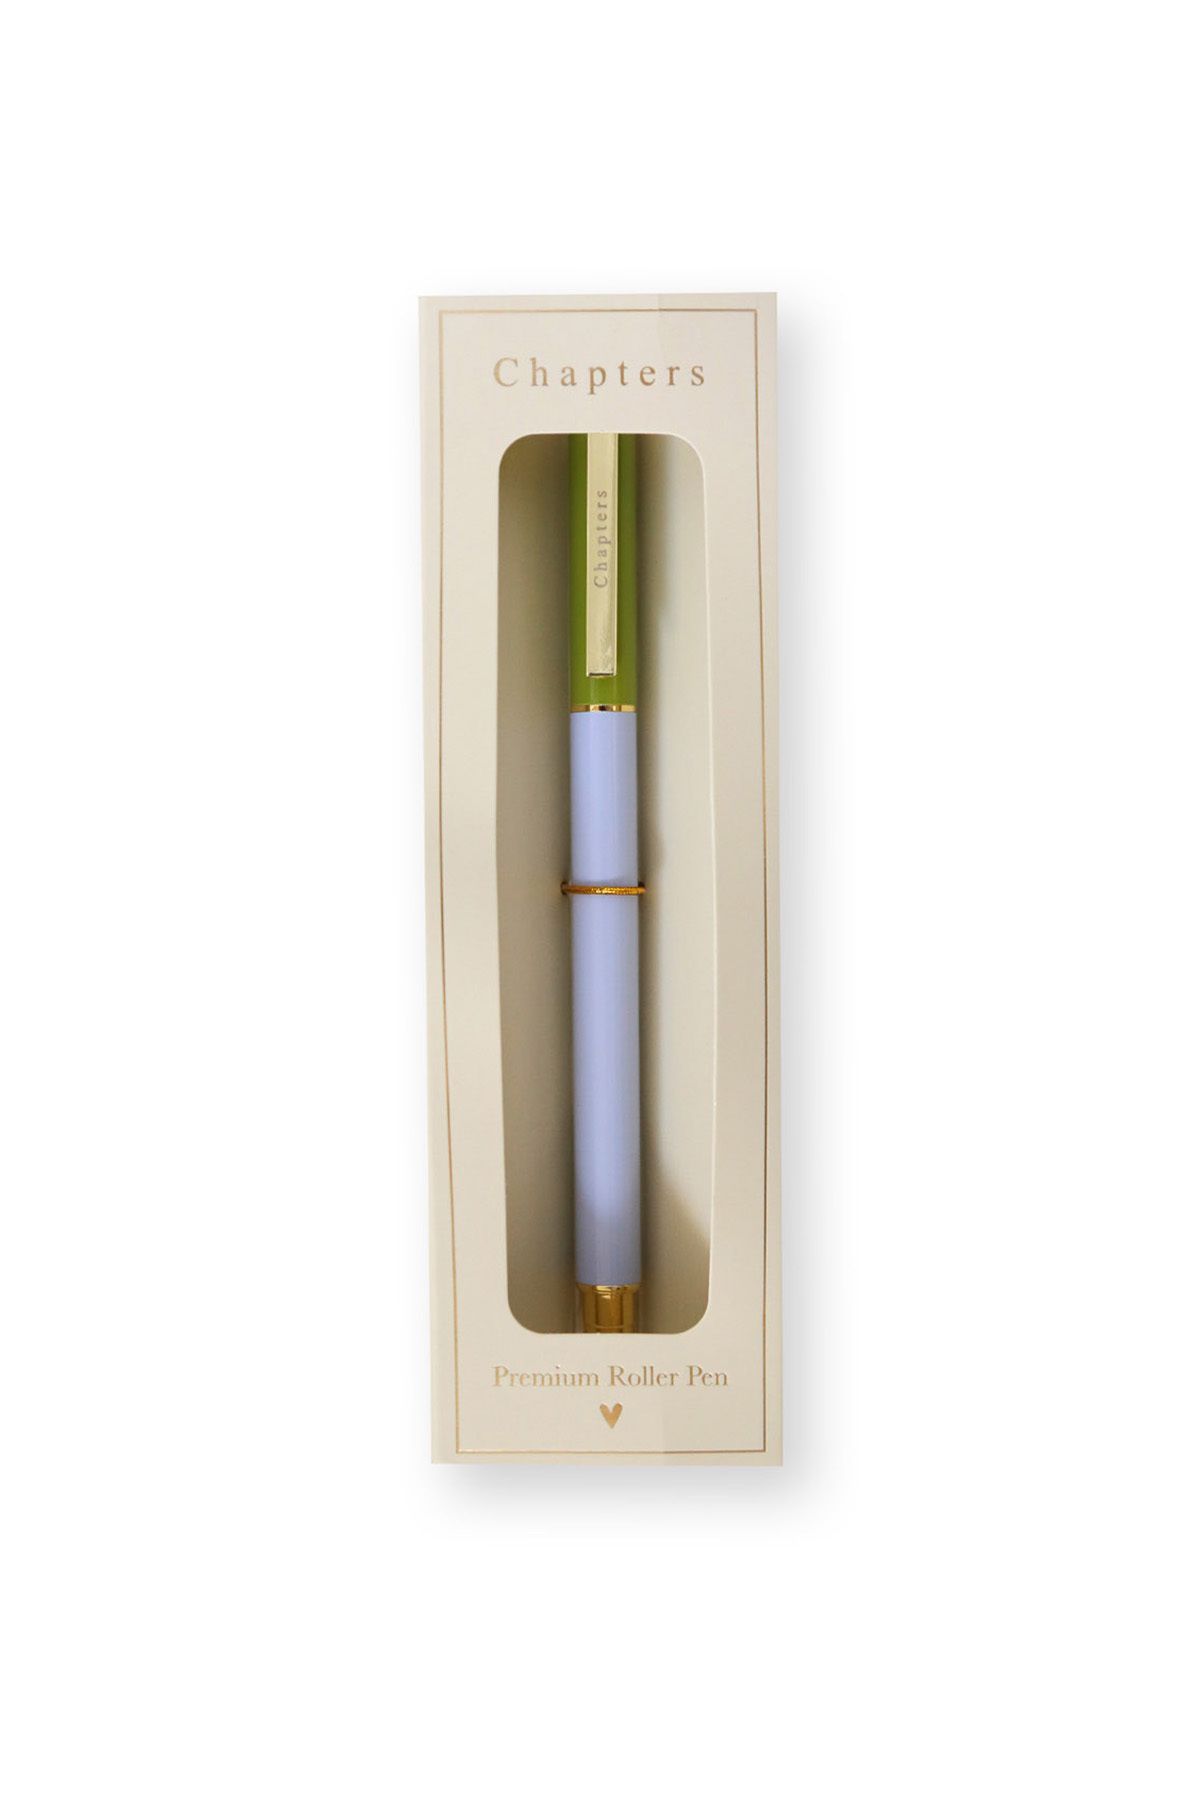 Chapters Premium Roller Pen, Green&Lilac